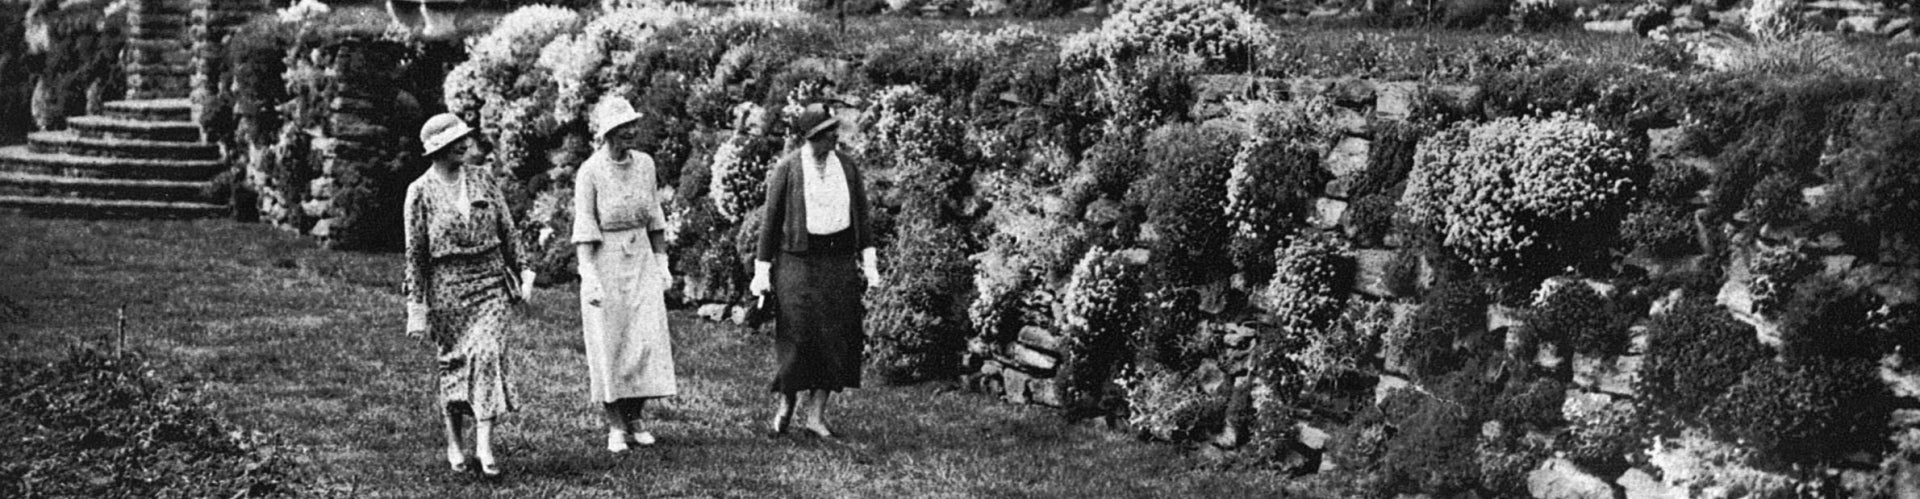 a black-and-white photo of woman from the early 20th century walking along a rock wall in bloom with flowers.